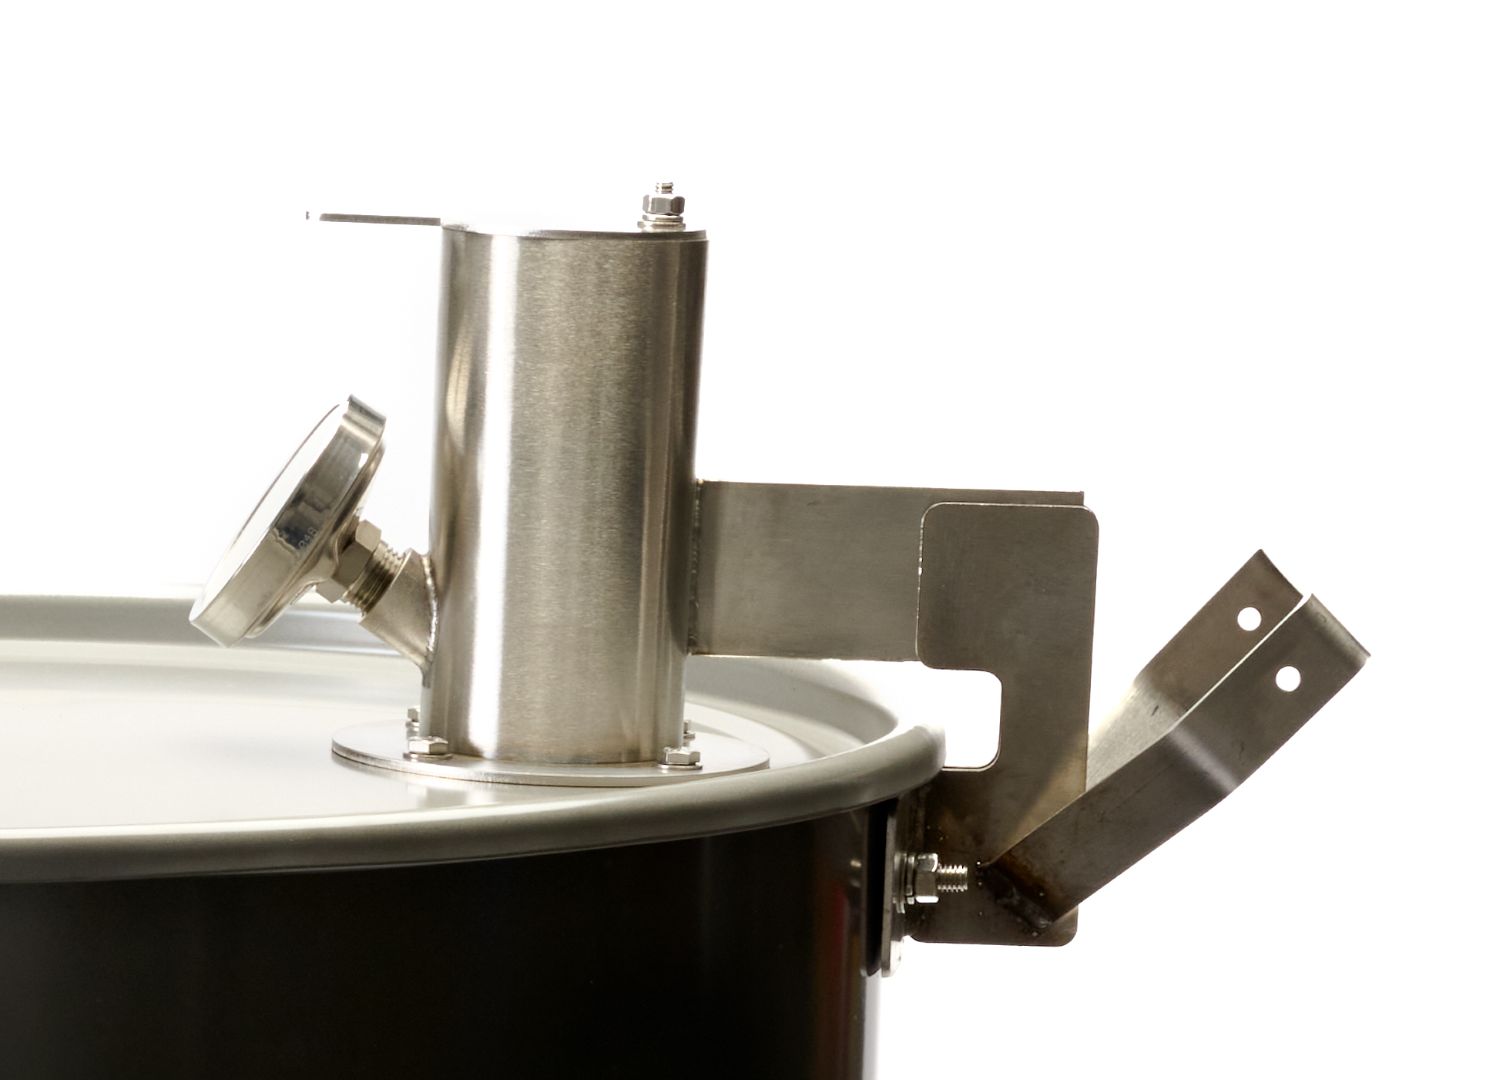 Stainless Steel Smoke Stack & Floating-Hinge Assembly - Hunsaker Vortex Smokers